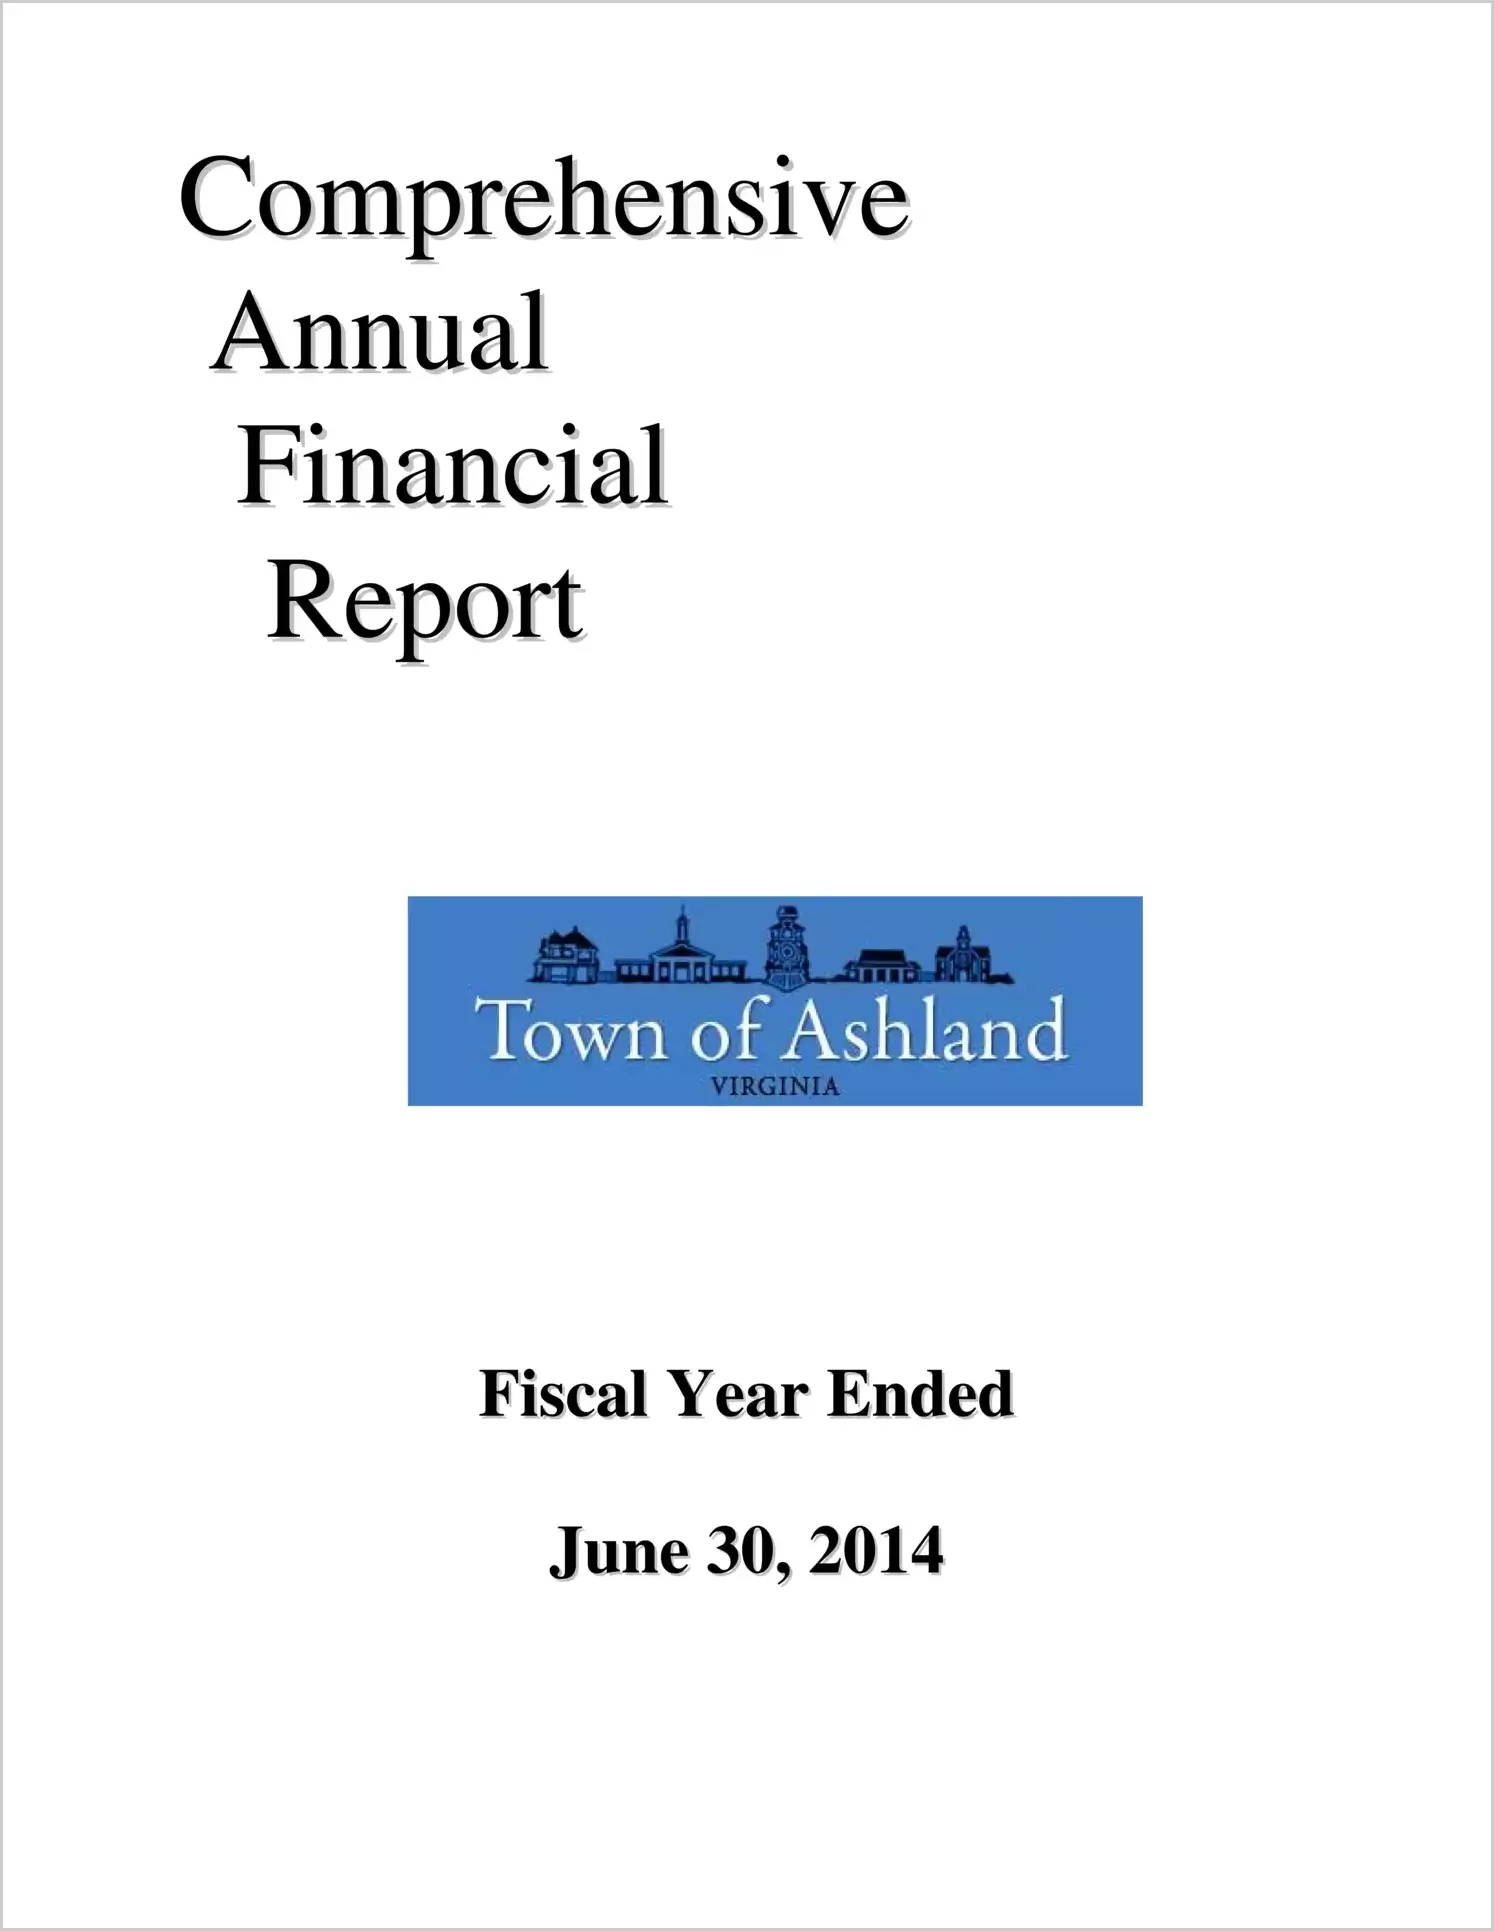 2014 Annual Financial Report for Town of Ashland